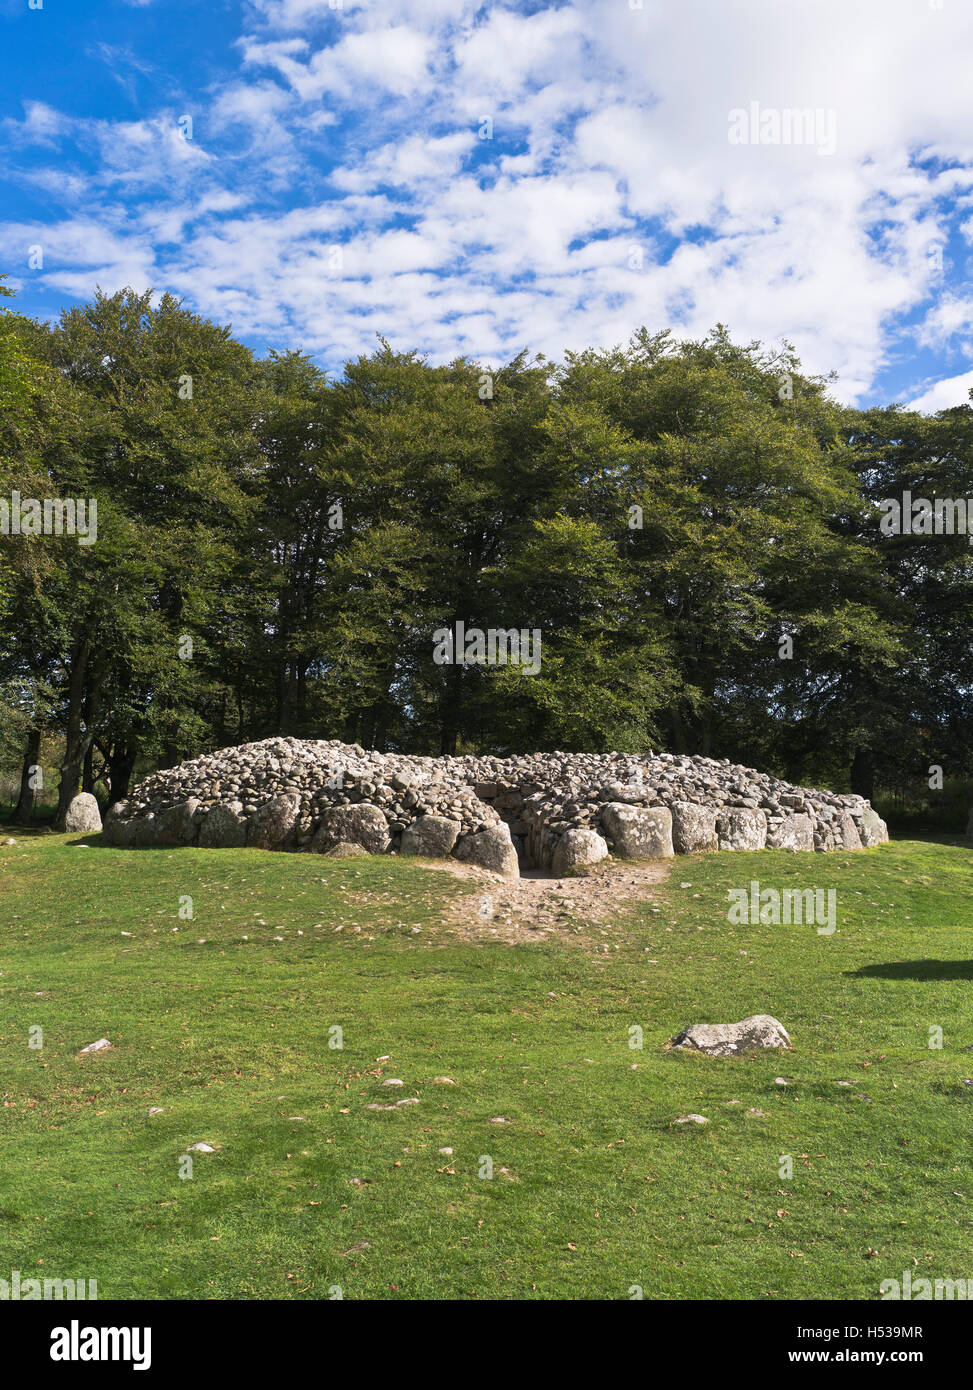 dh Balnuaran of Clava CULLODEN MOOR INVERNESS SHIRE Prehistoric chamber Cairns neolithic tomb bronze age cairn scotland burial site mound uk sites Stock Photo